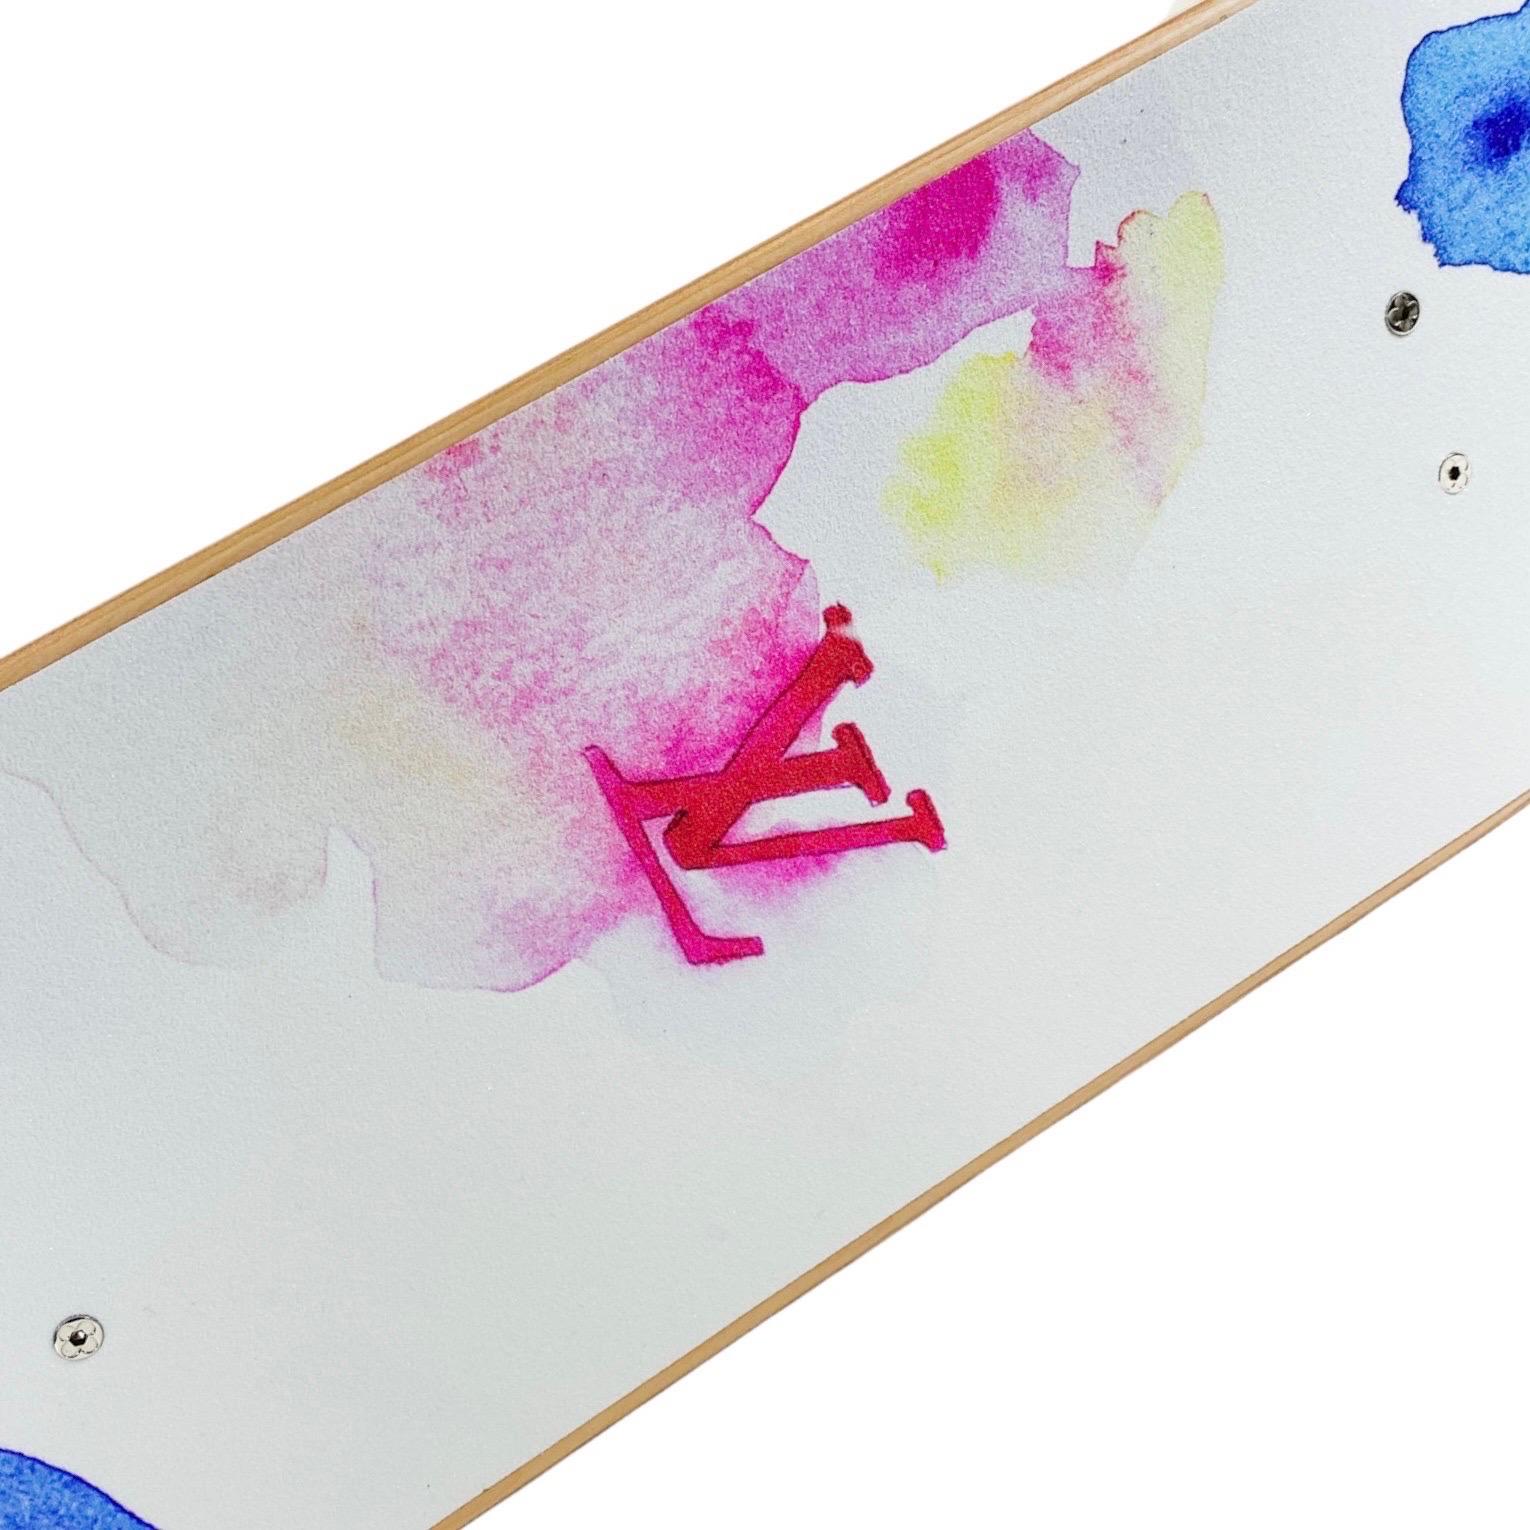 Gray Brand New Louis Vuitton Water Color Skateboard For Sale